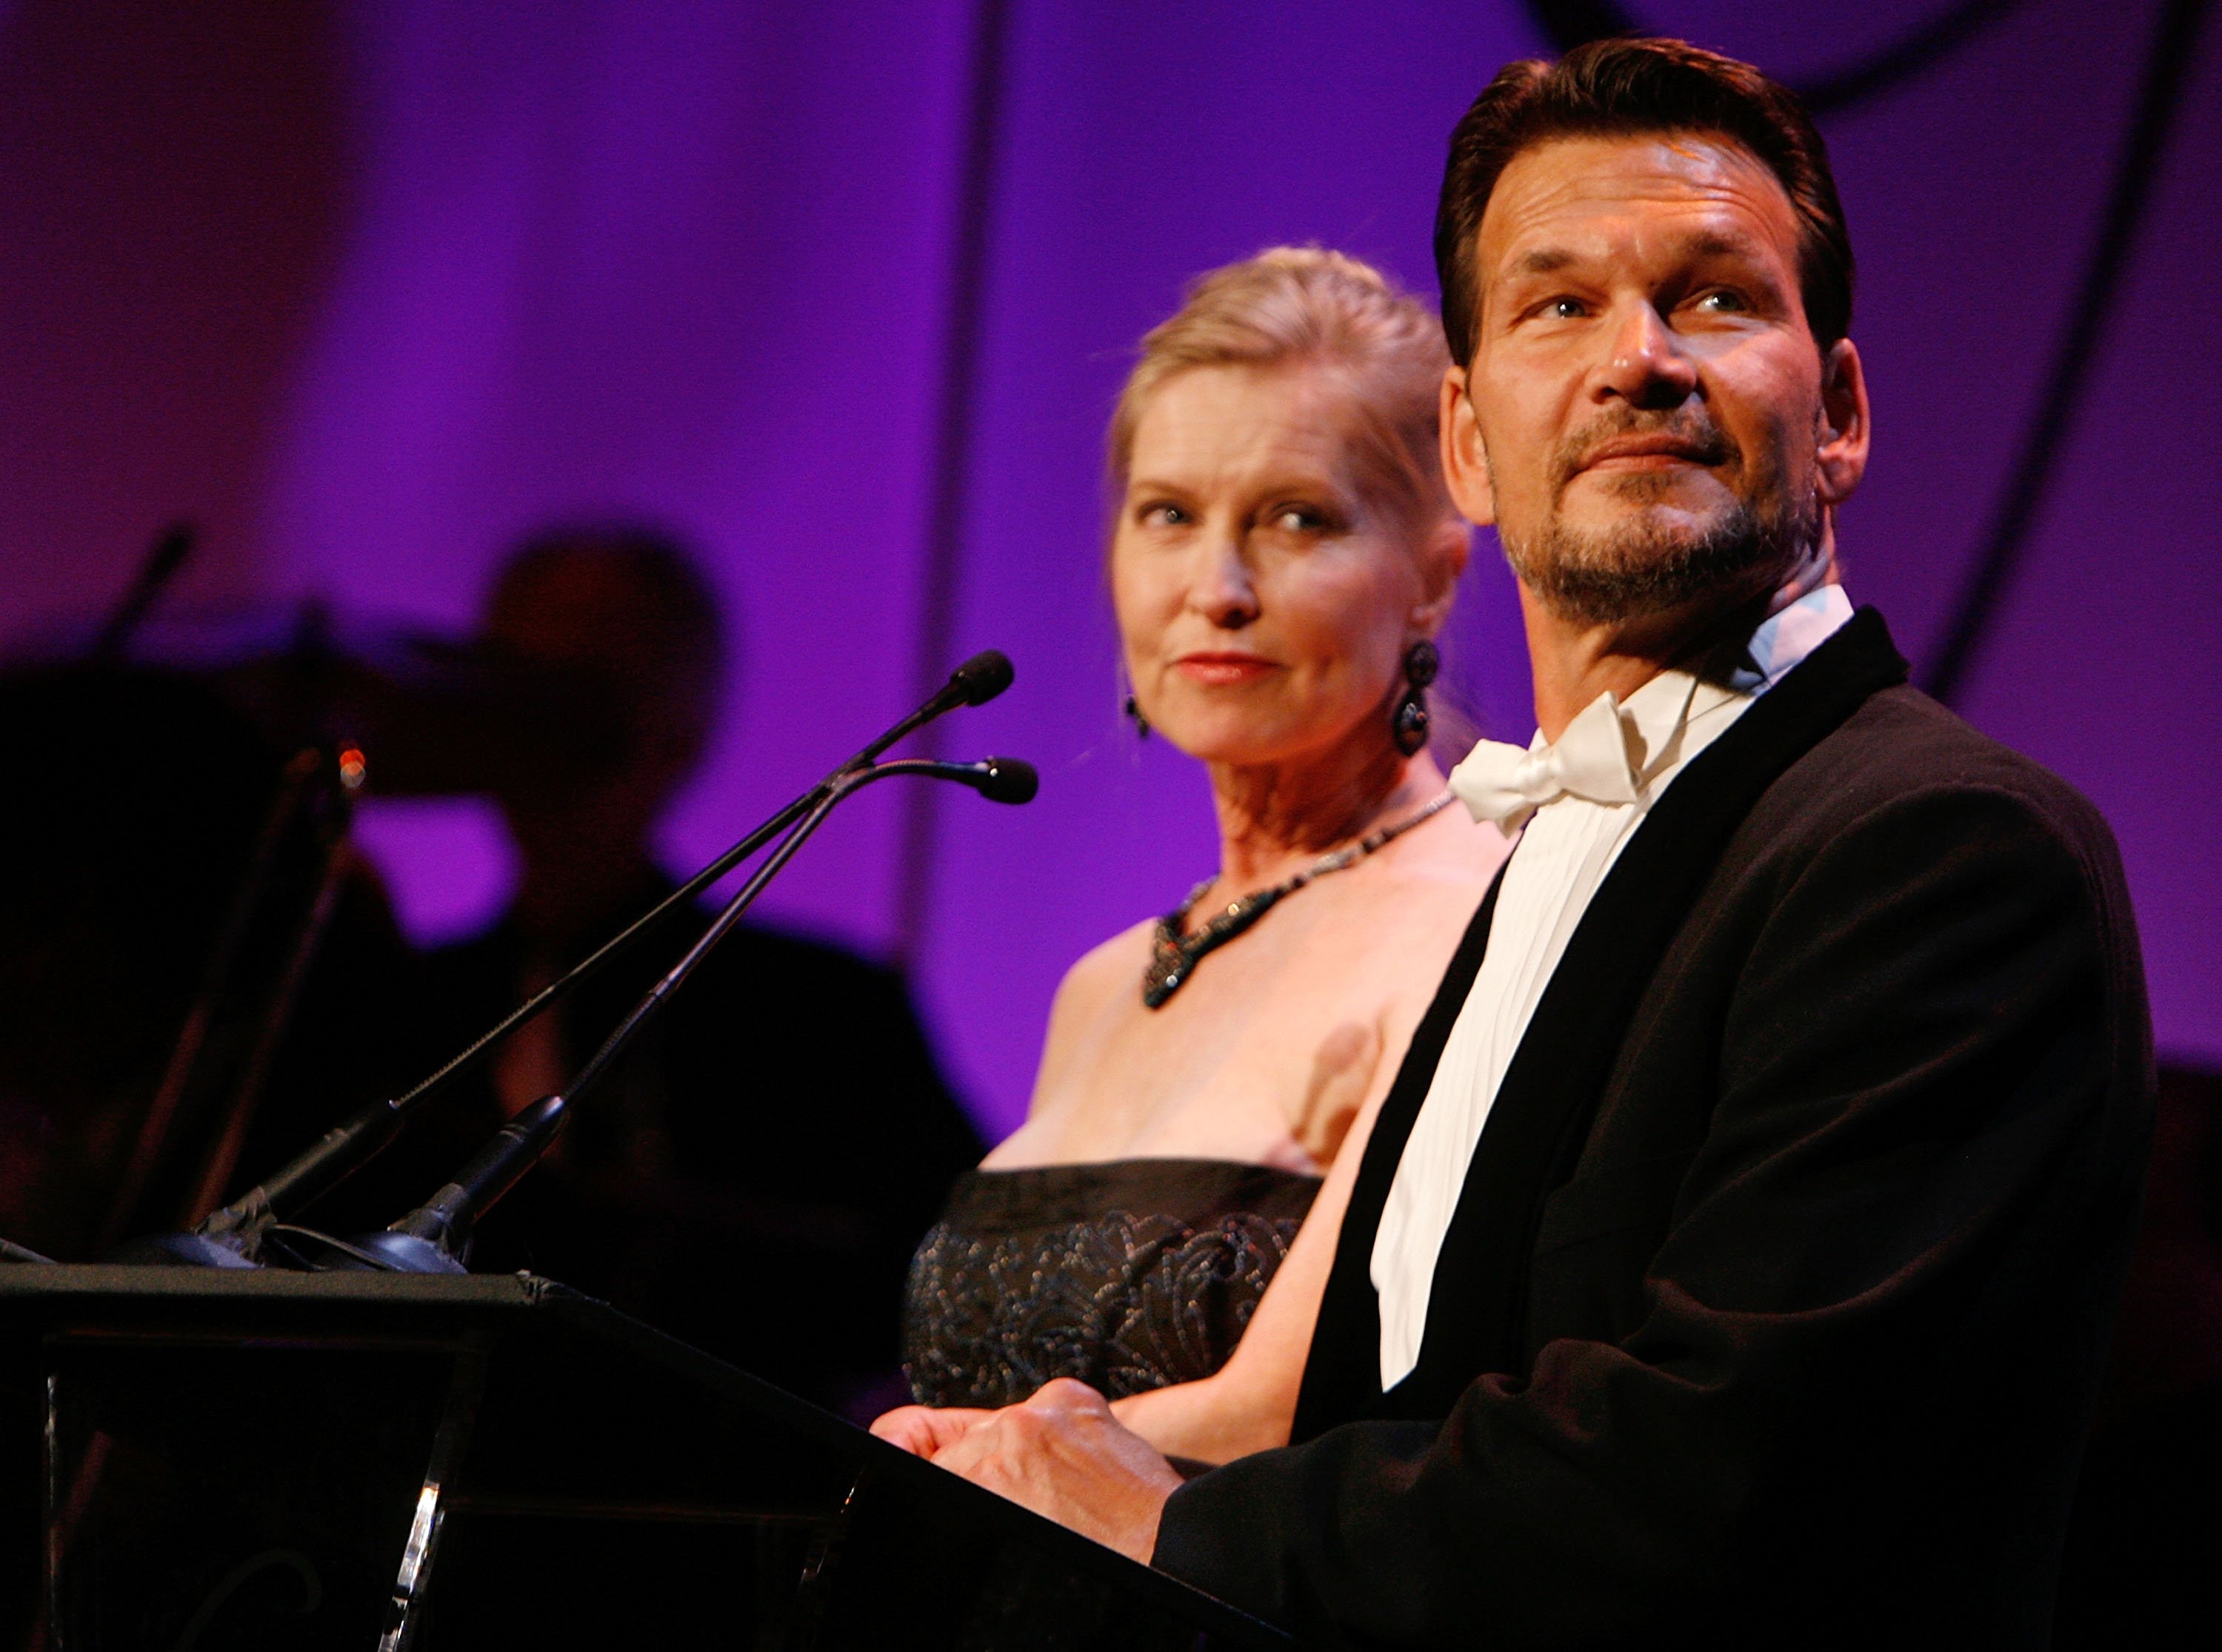 Lisa Niemi and actor Patrick Swayze during the 9th annual Costume Designers Guild Awards on February 17, 2007 | Photo: GettyImages